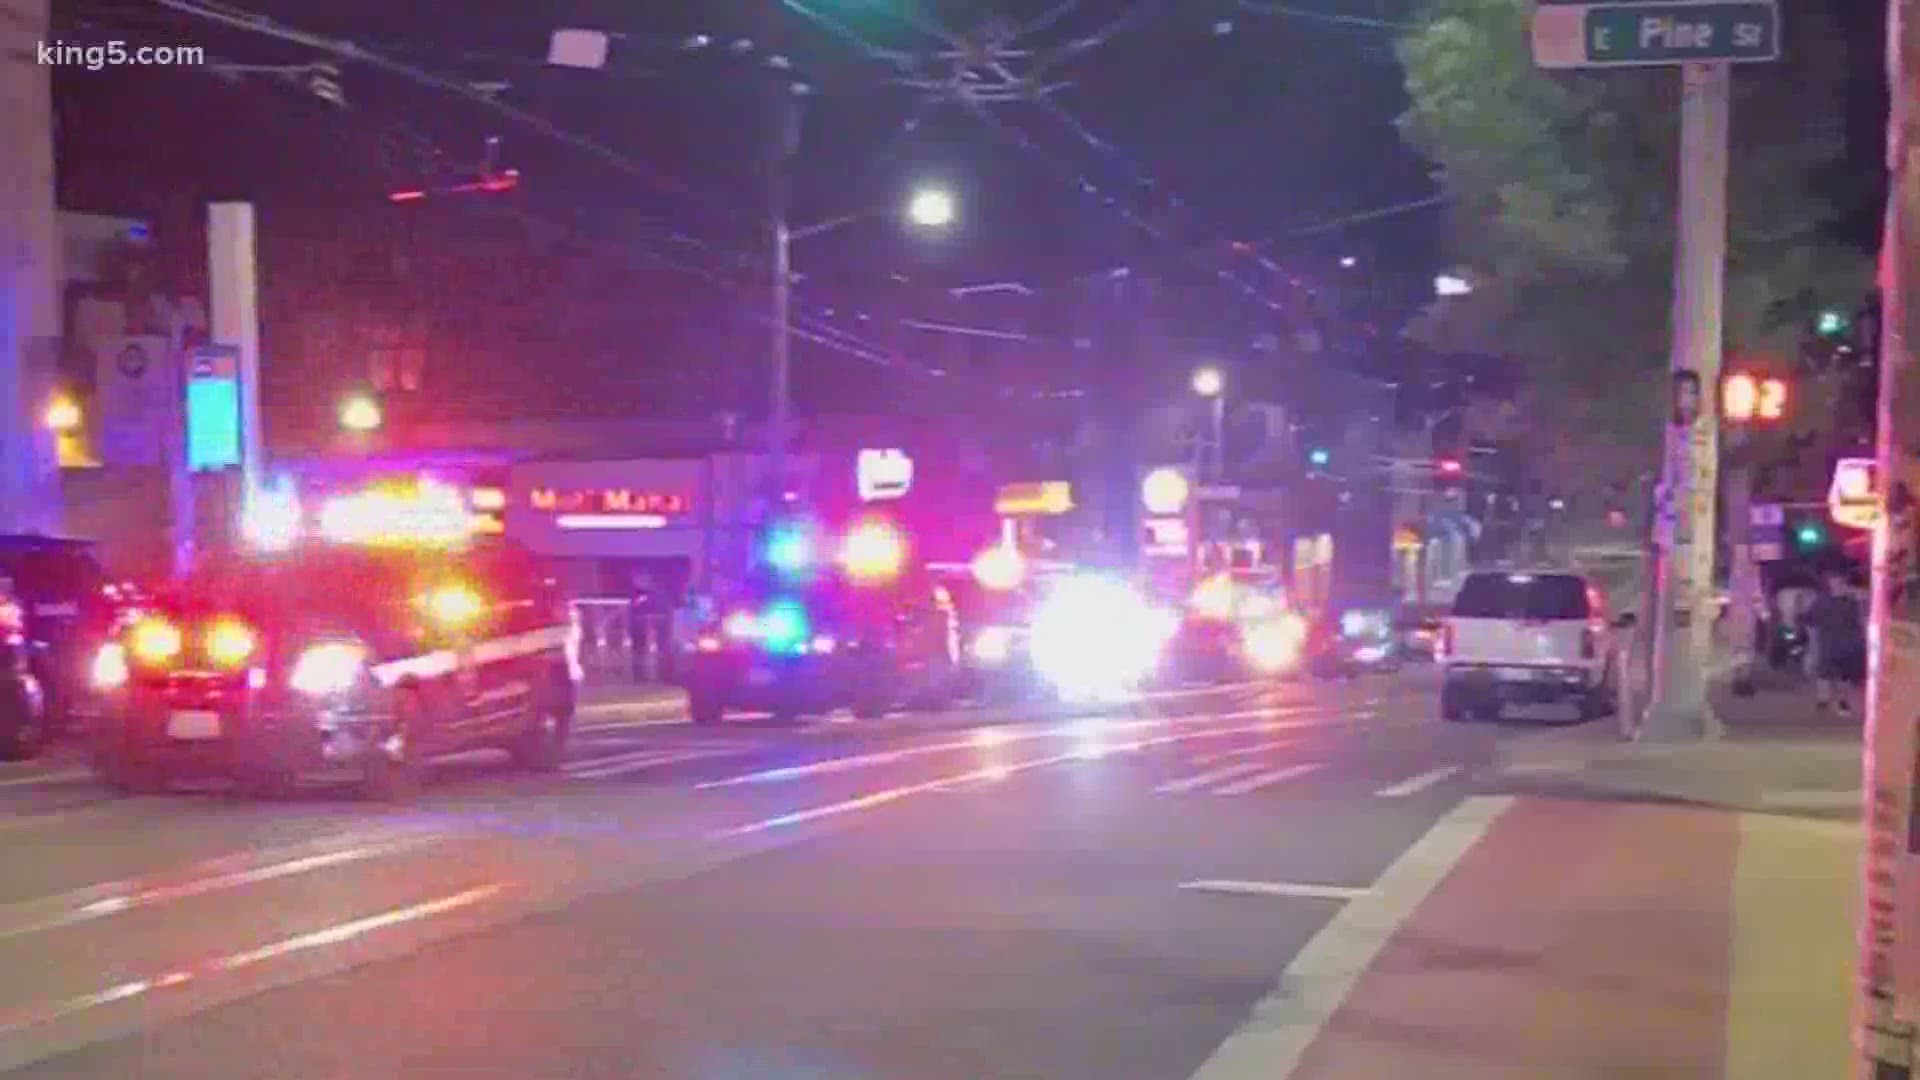 Seattle police responded to a report of shots fired in Cal Anderson Park, near the intersection of 10th Ave. and E. Pine Street, at about 2:30 a.m. Saturday.